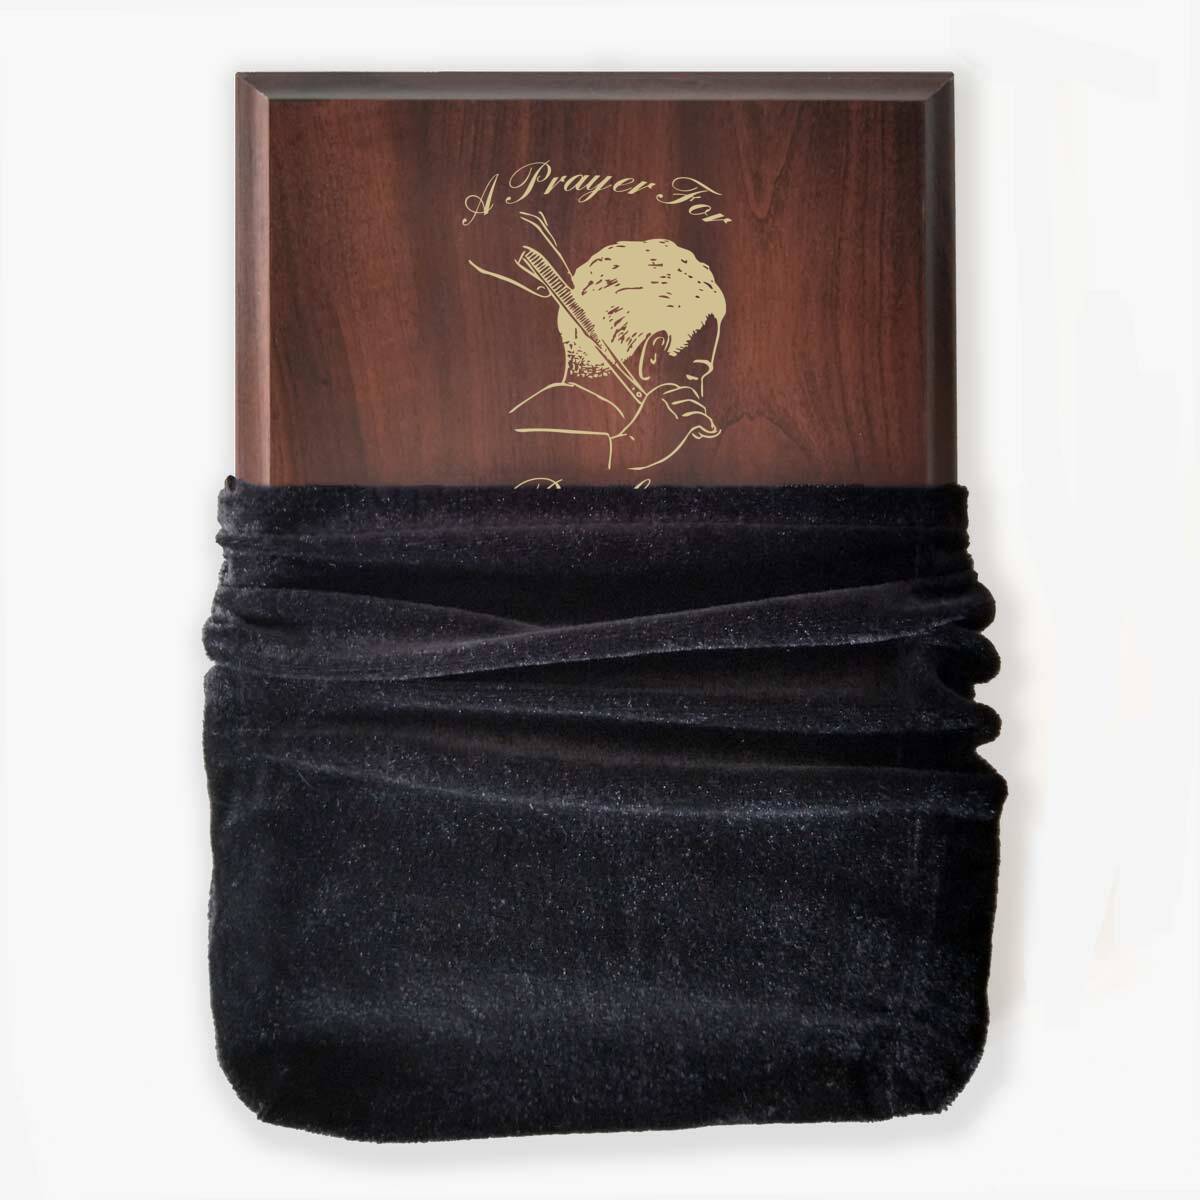 Photo of plaque inside the optional velvet gift bag, showing some of the printed design.